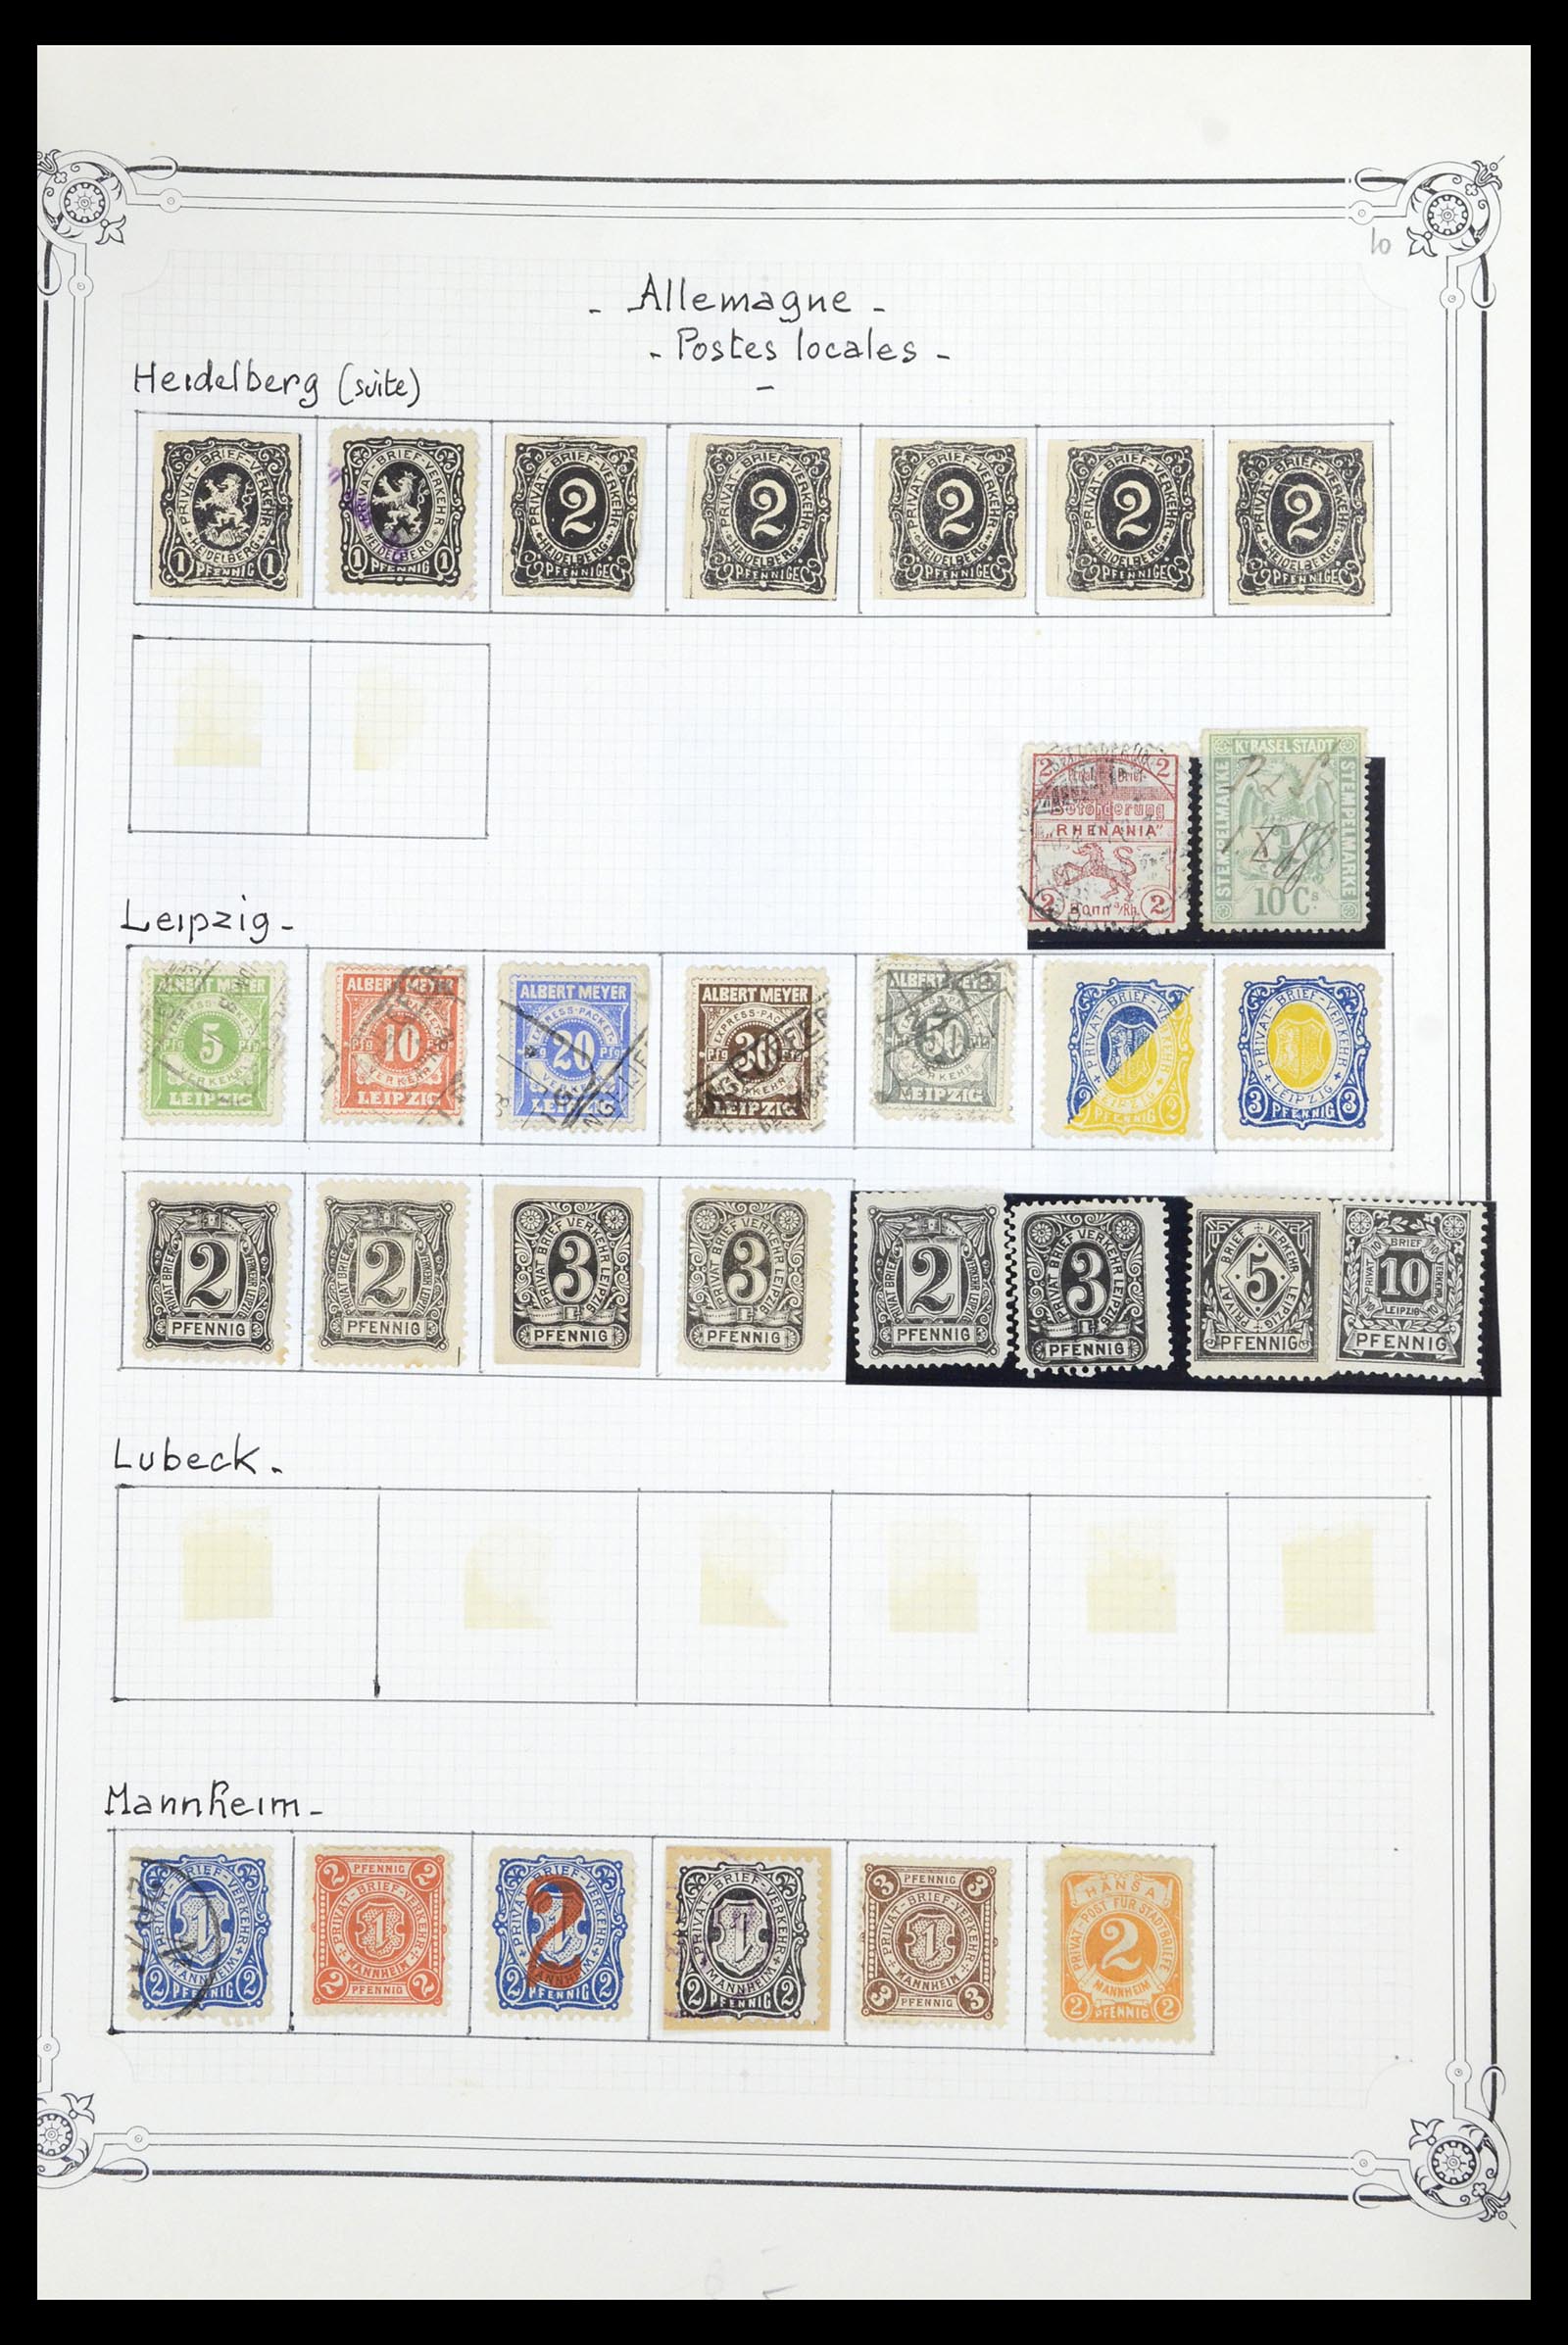 36972 010 - Stamp collection 36972 Germany local post 1880-1900.